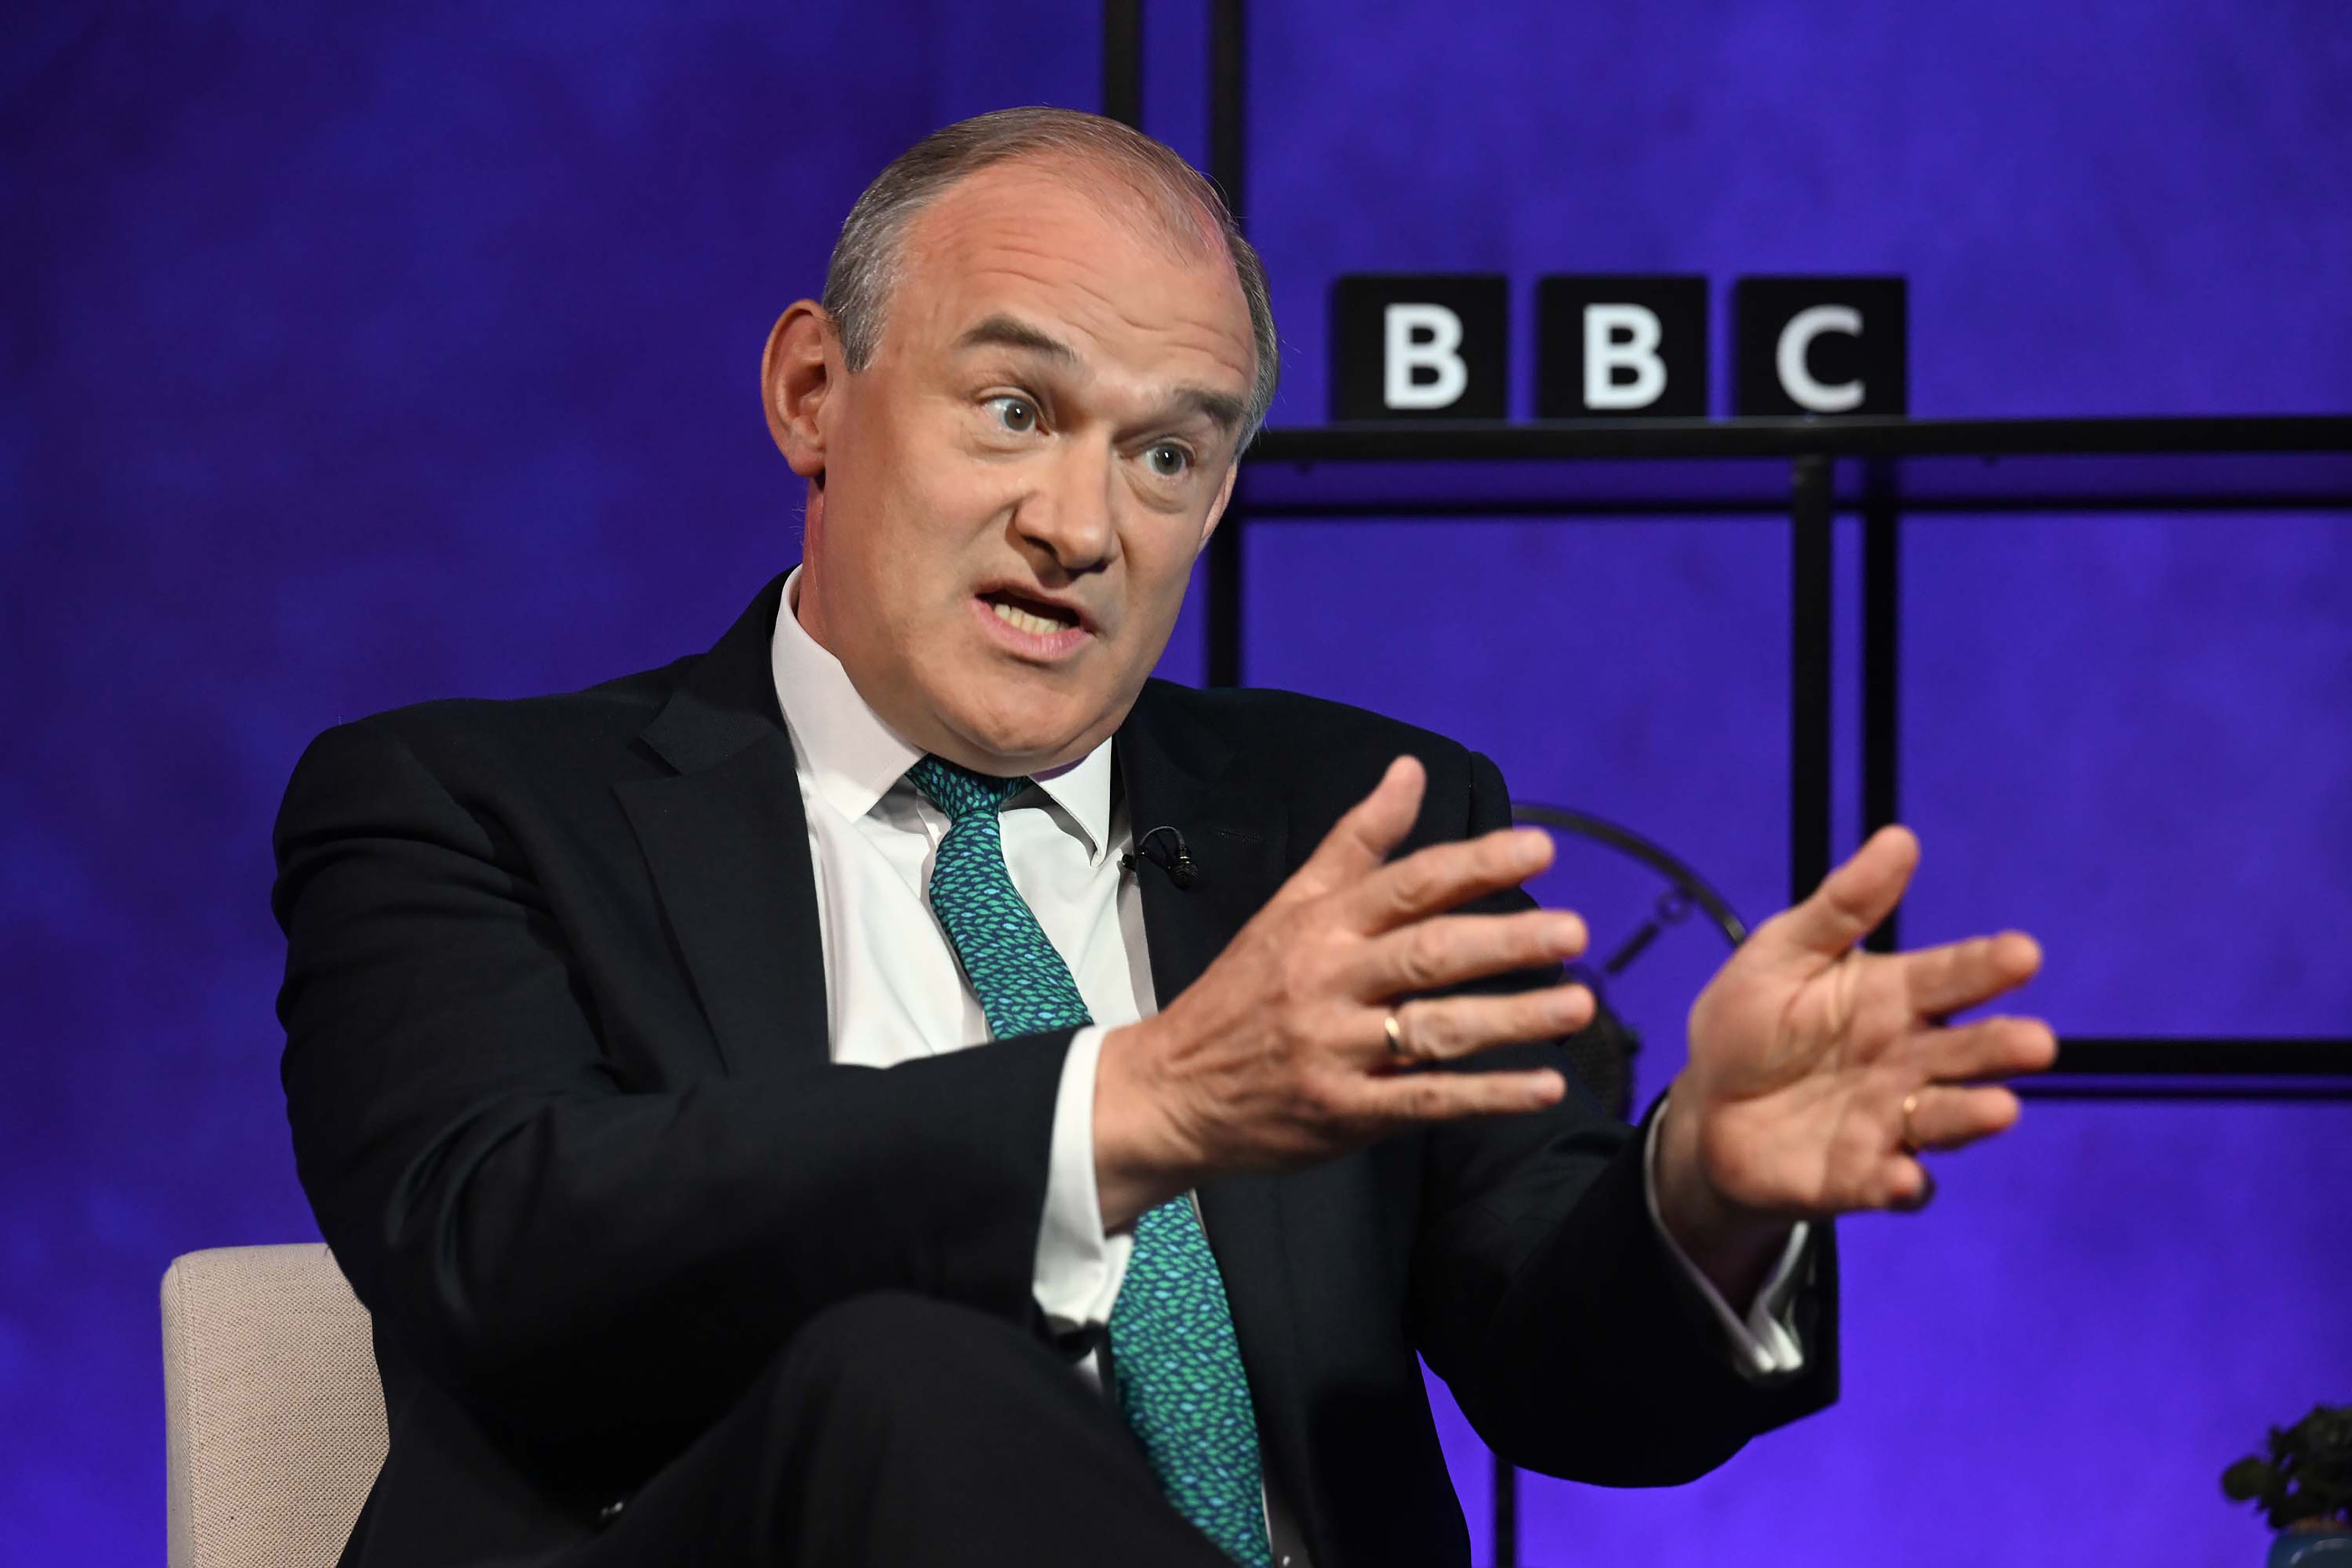 Sir Ed Davey said he does not ‘share any values’ with Nigel Farage (BBC/PA)